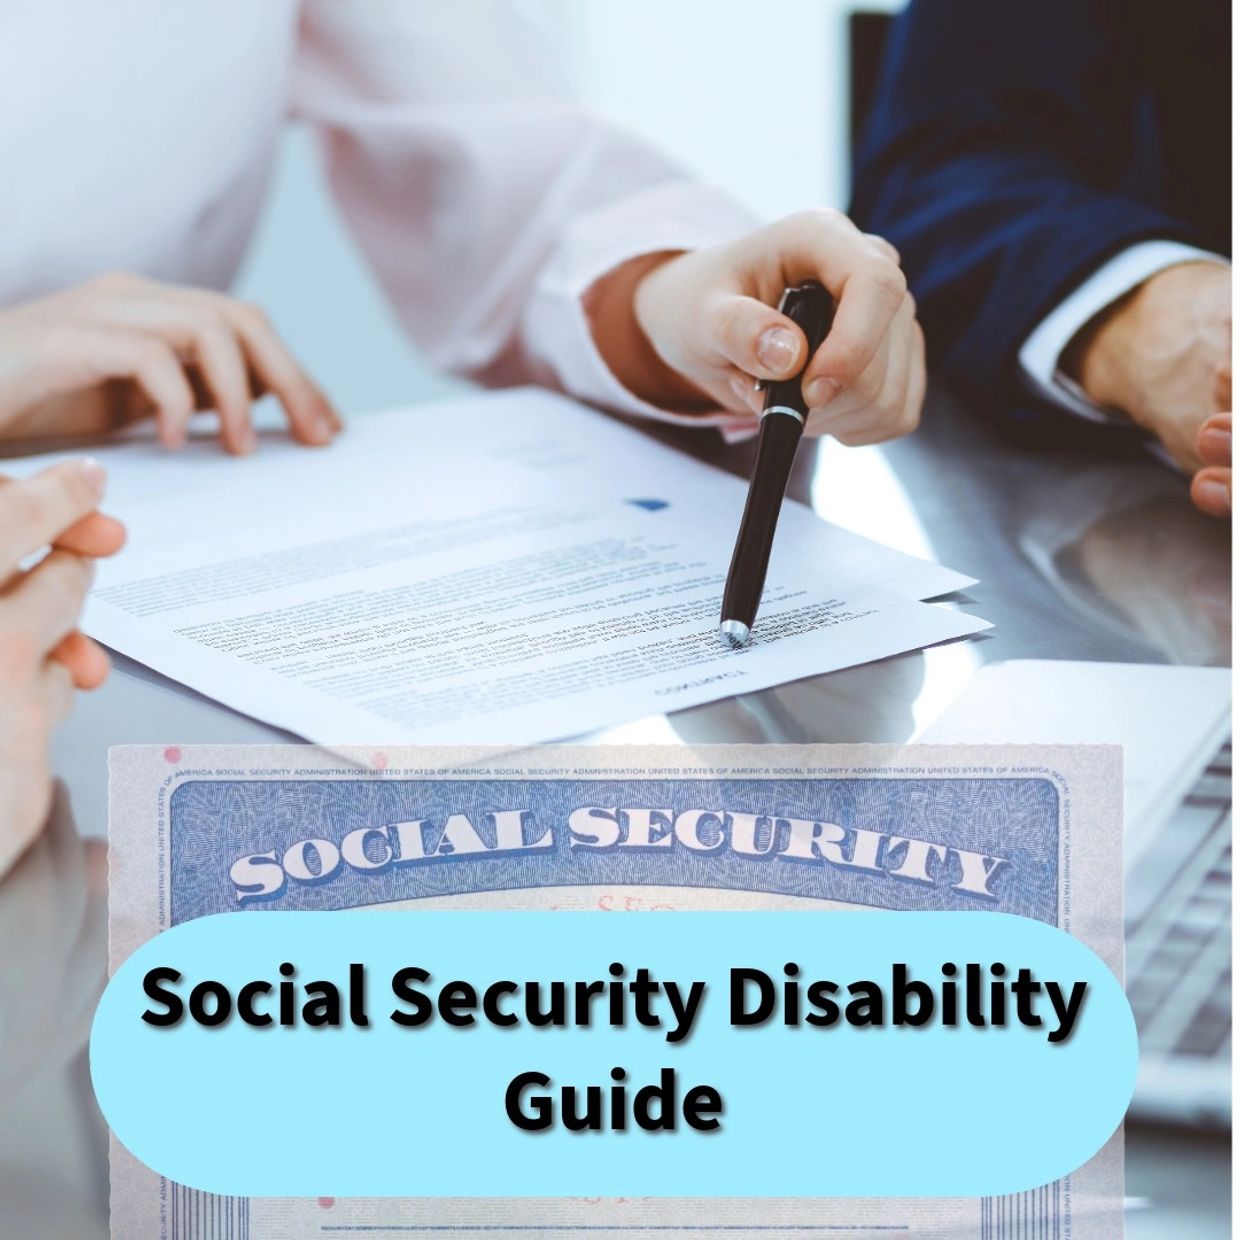 Social Security Disability in Puerto Rico